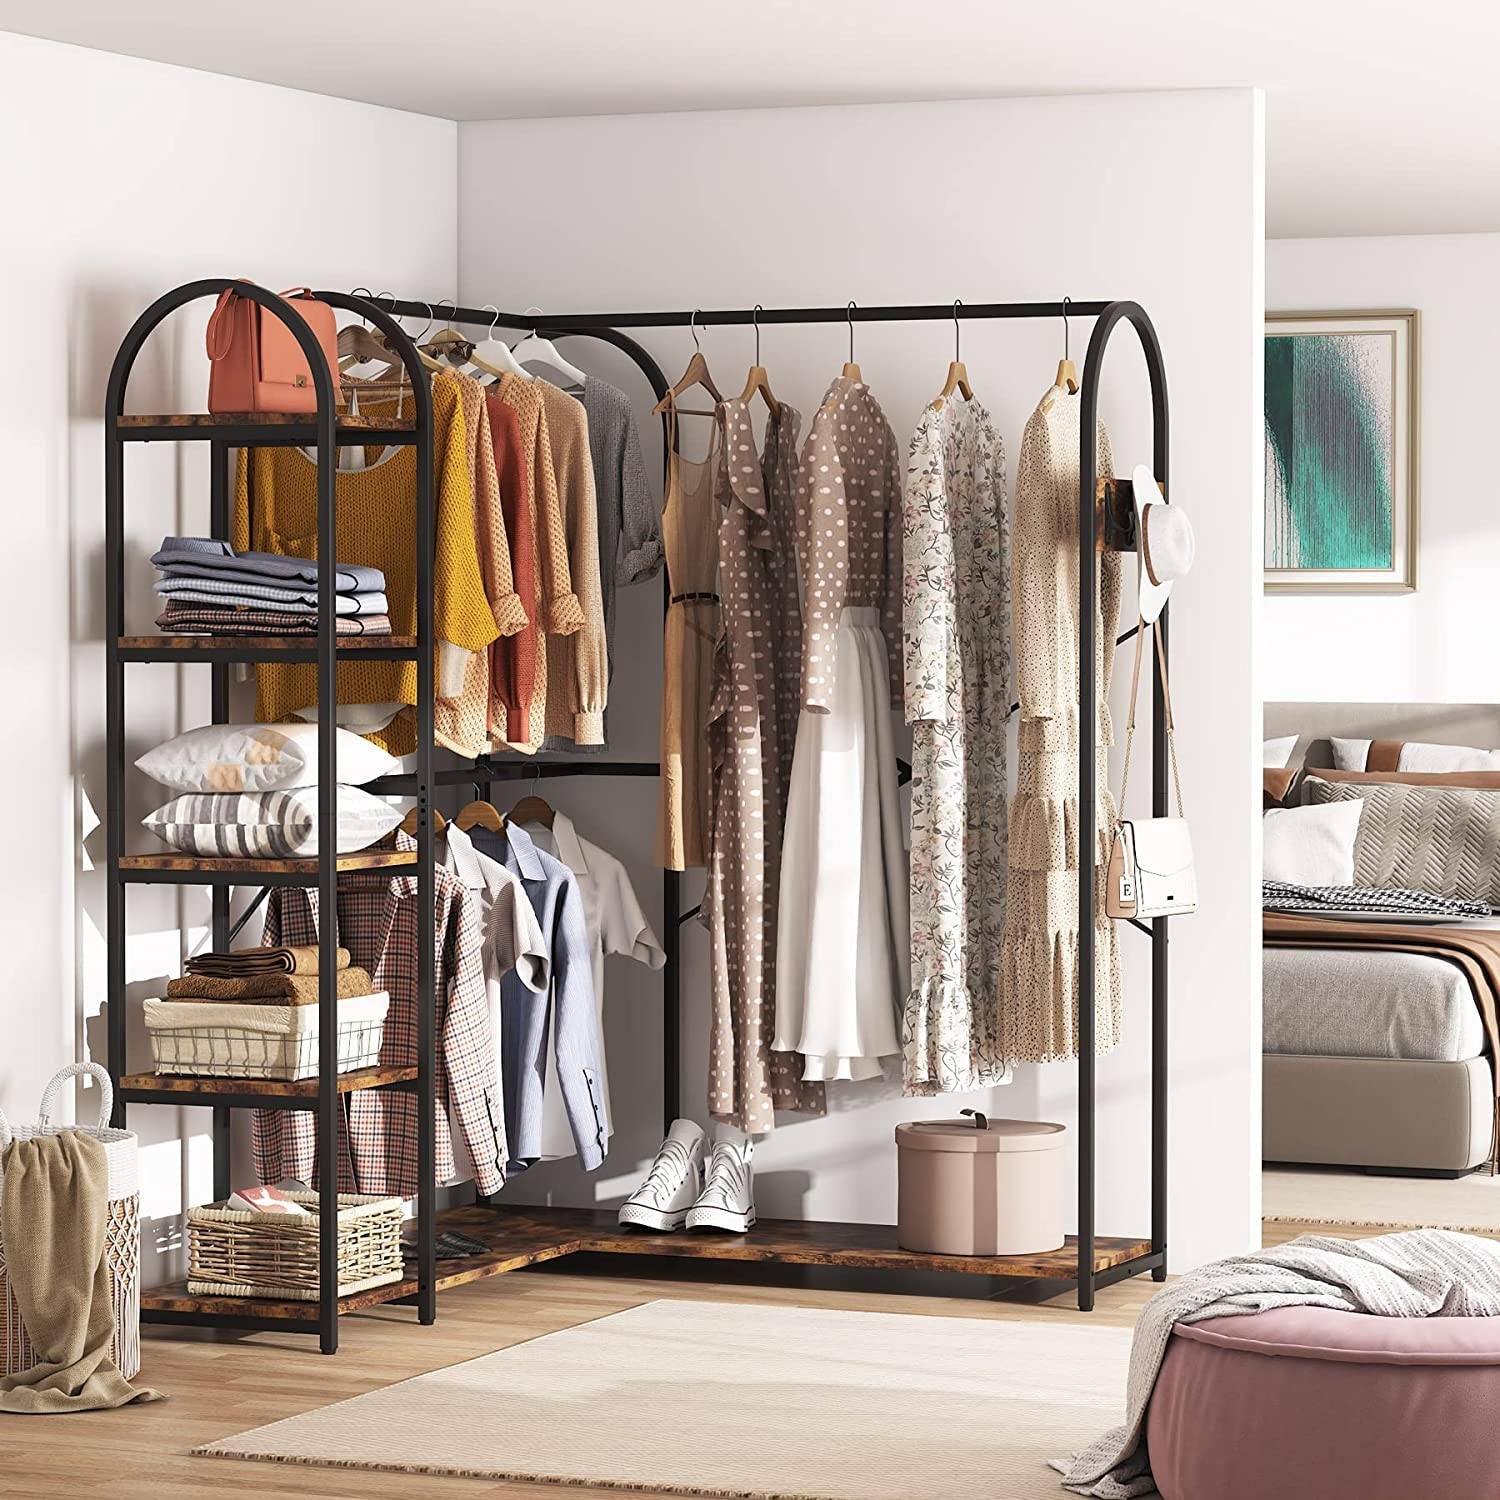 https://ak1.ostkcdn.com/images/products/is/images/direct/4bd1fc0aaeebe4e5e814a9edbc39006a7a3cc4a6/L-Shaped-Corner-Garment-Rack-Clothing-Rack-with-Storage-Shelves-and-Side-Hooks.jpg